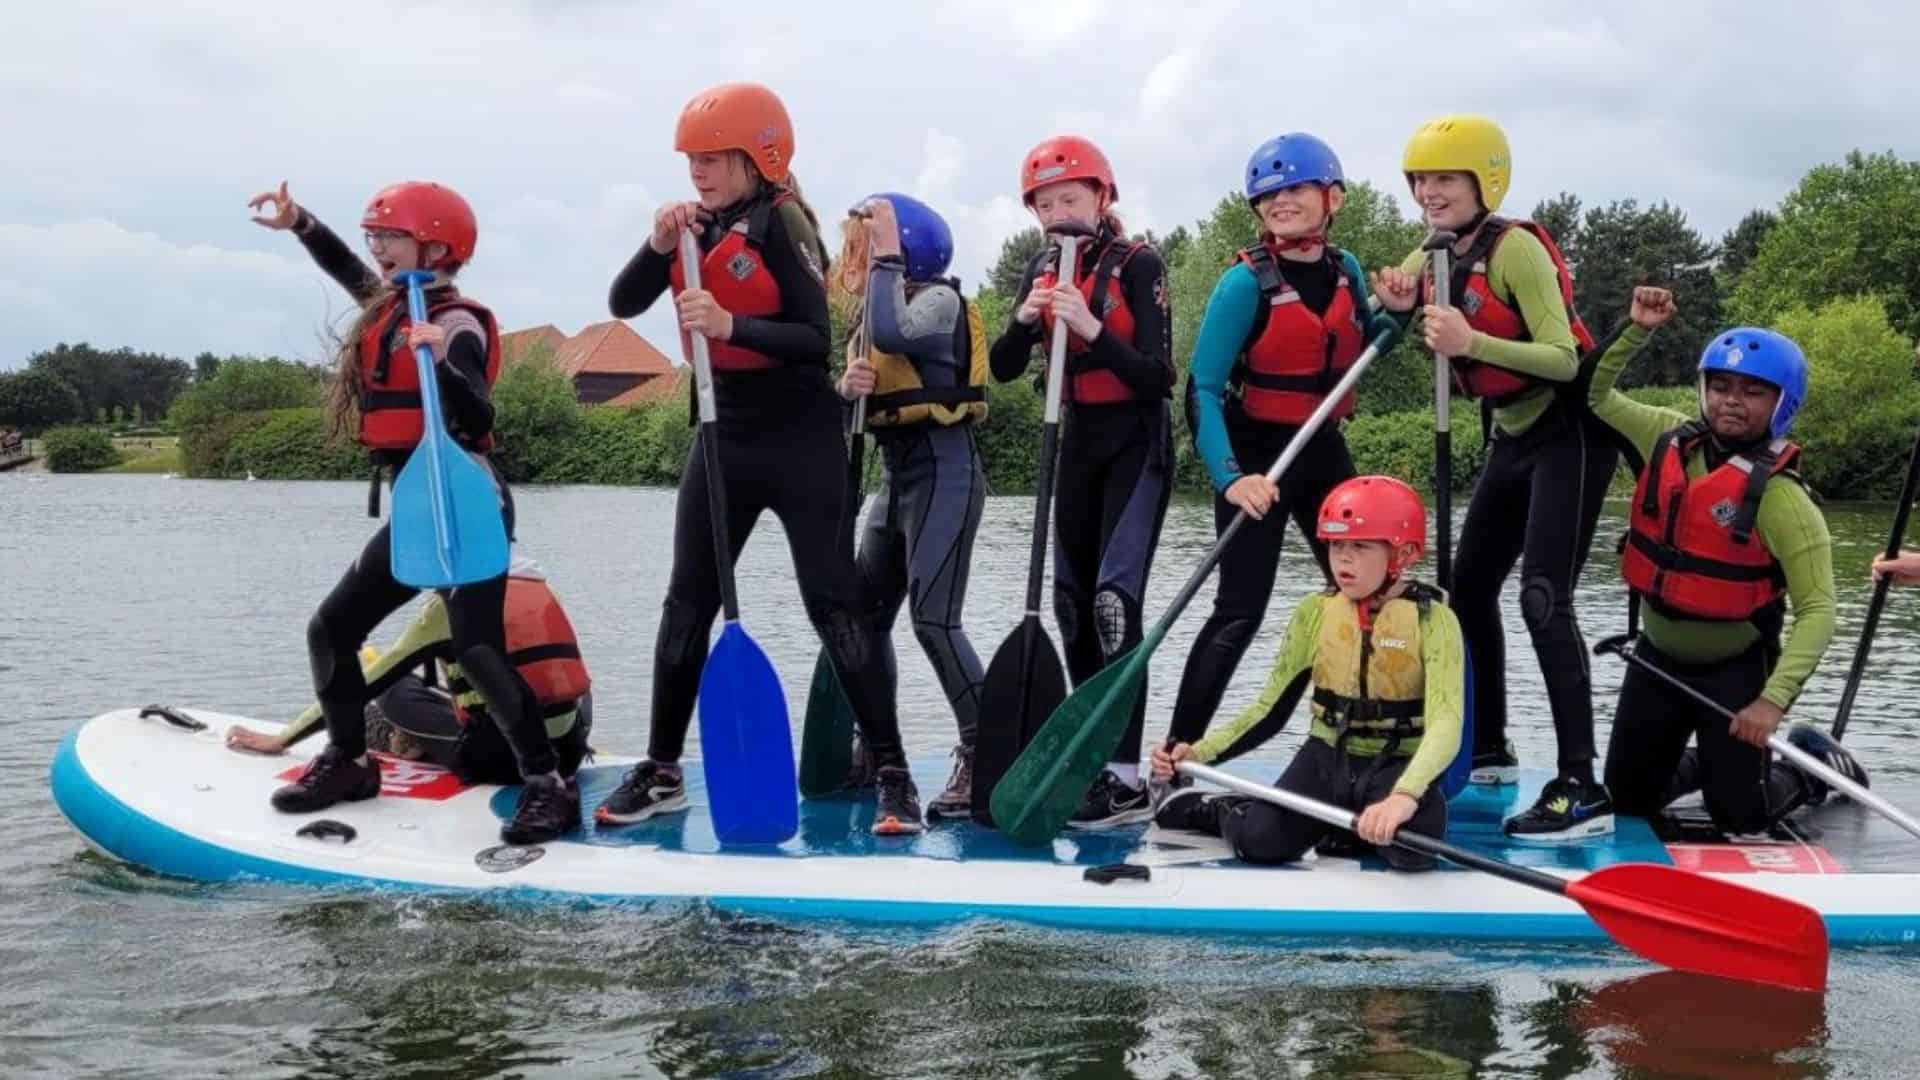 Young people paddleboarding promoting group offer